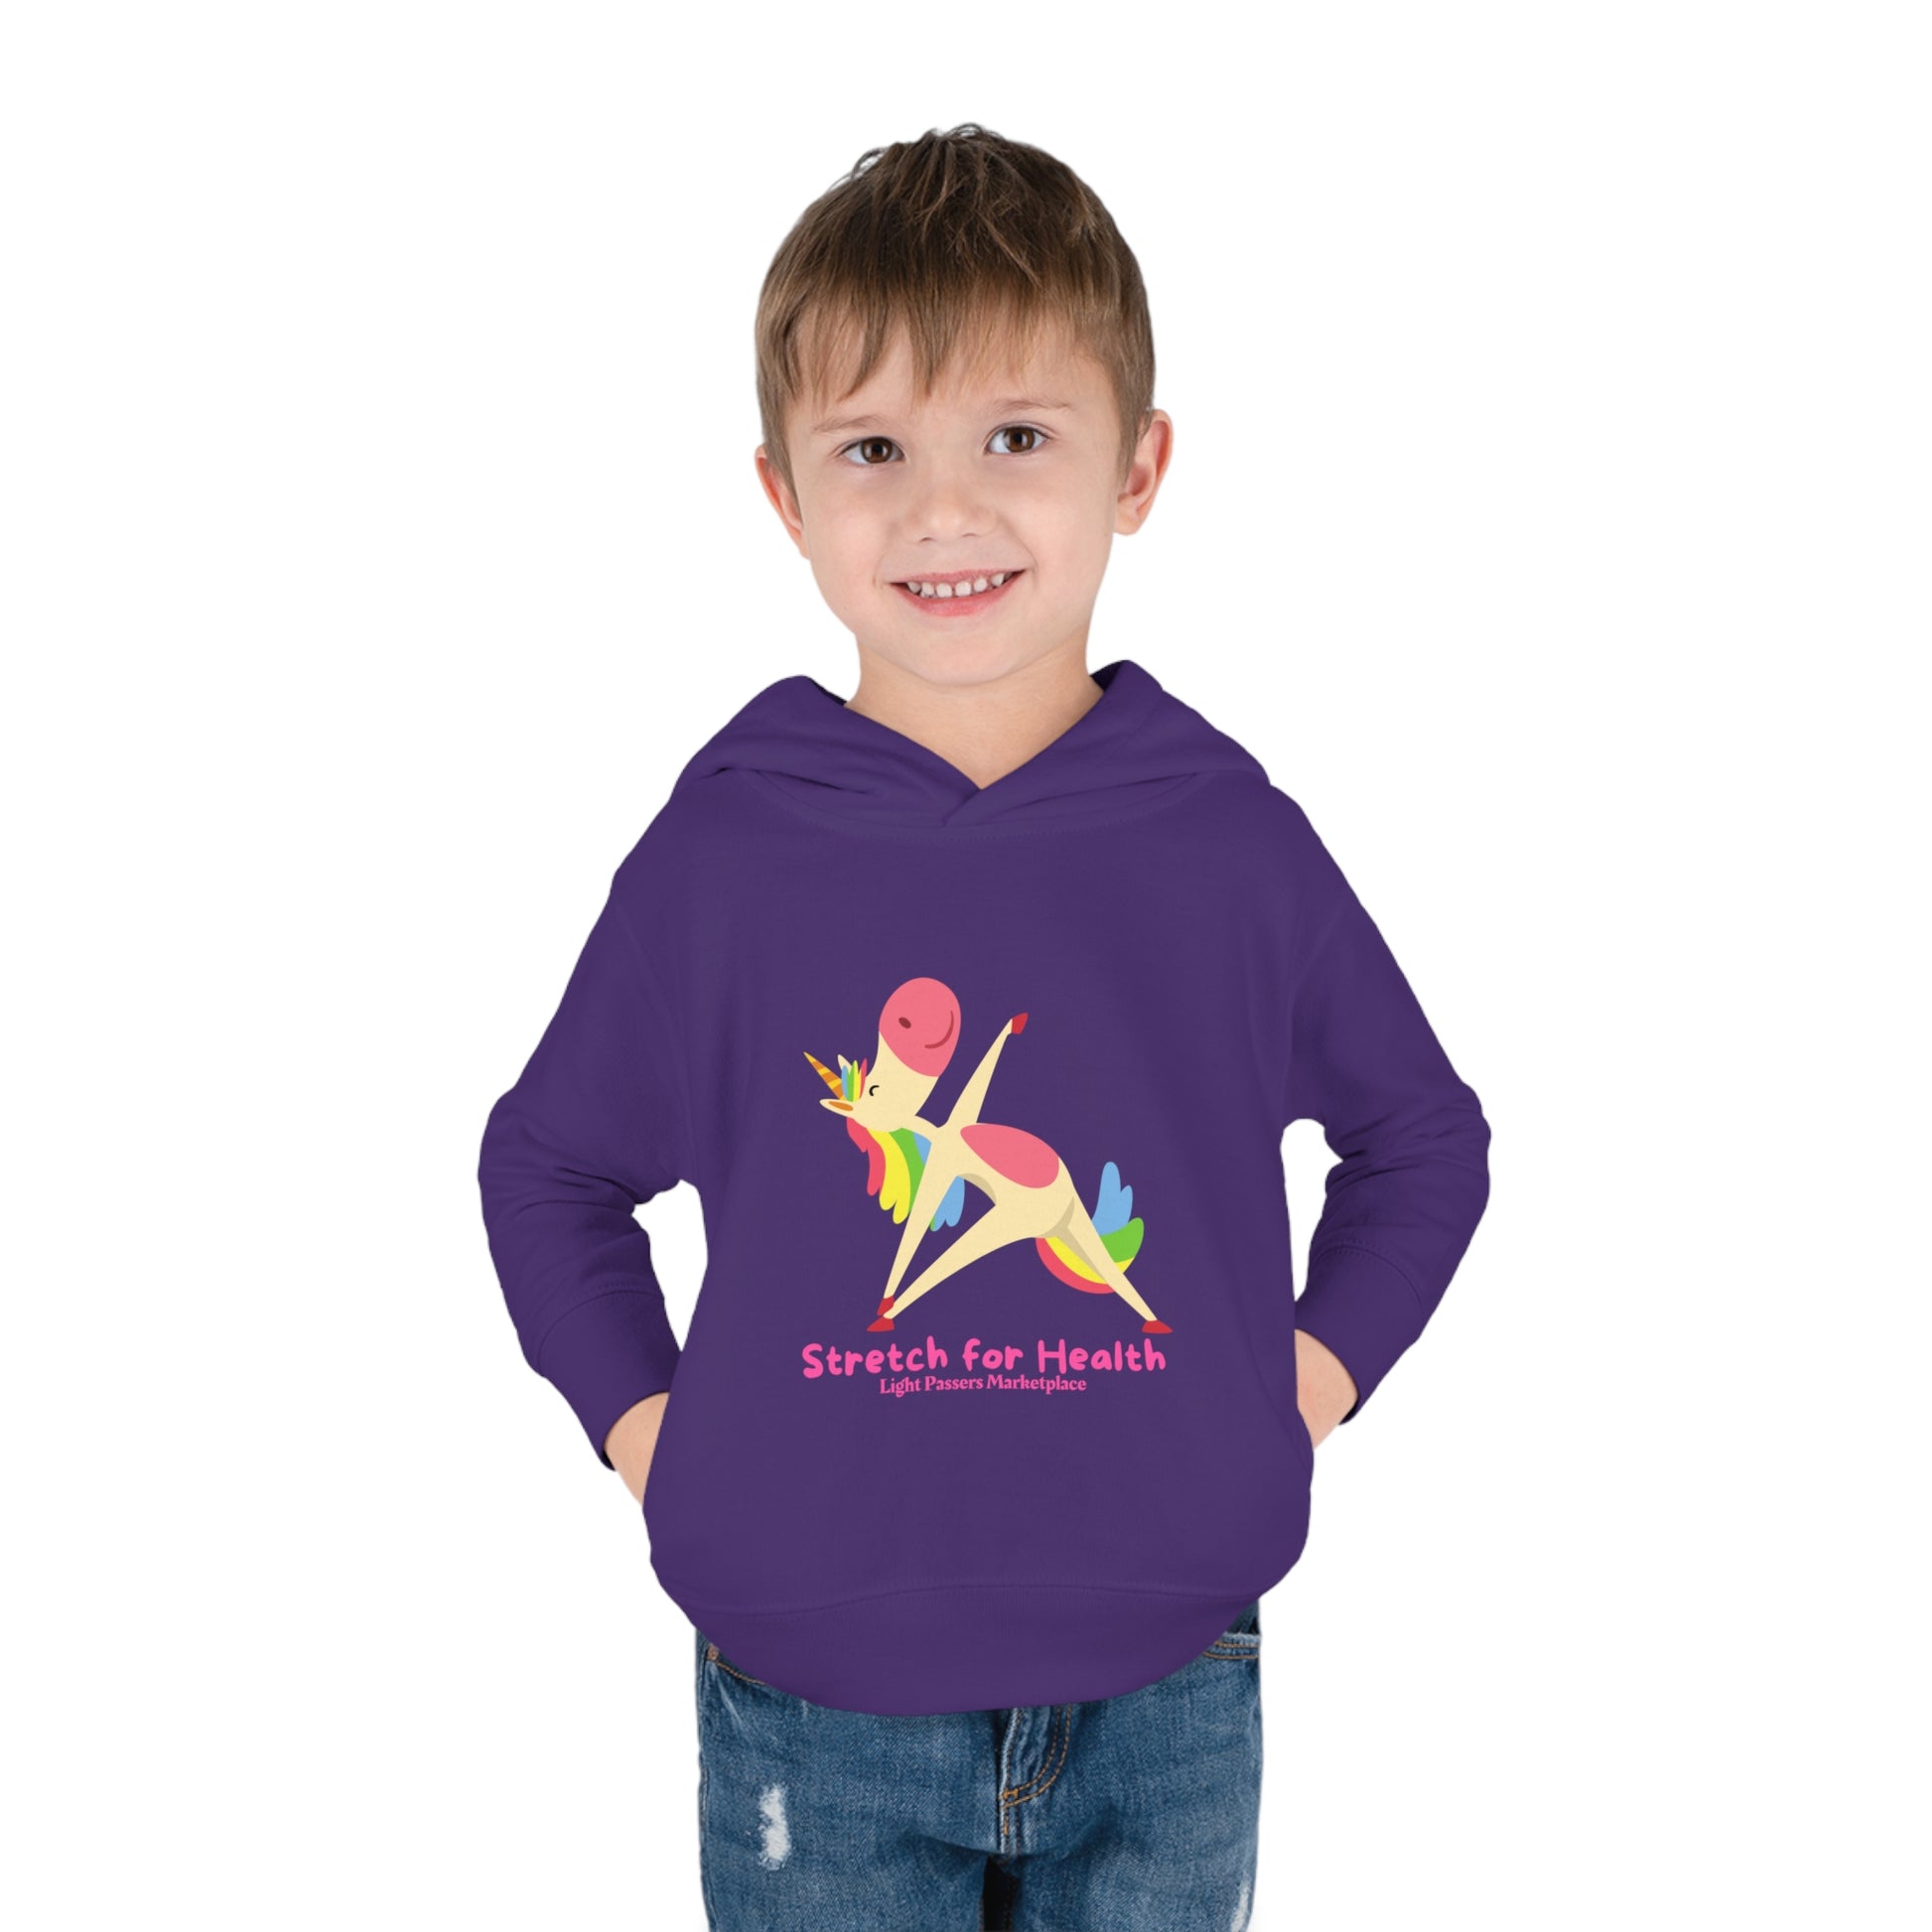 A smiling toddler in a Rabbit Skins Unicorn Stretch Toddler Hooded Sweatshirt with side seam pockets, jersey-lined hood, and durable stitching for lasting coziness.